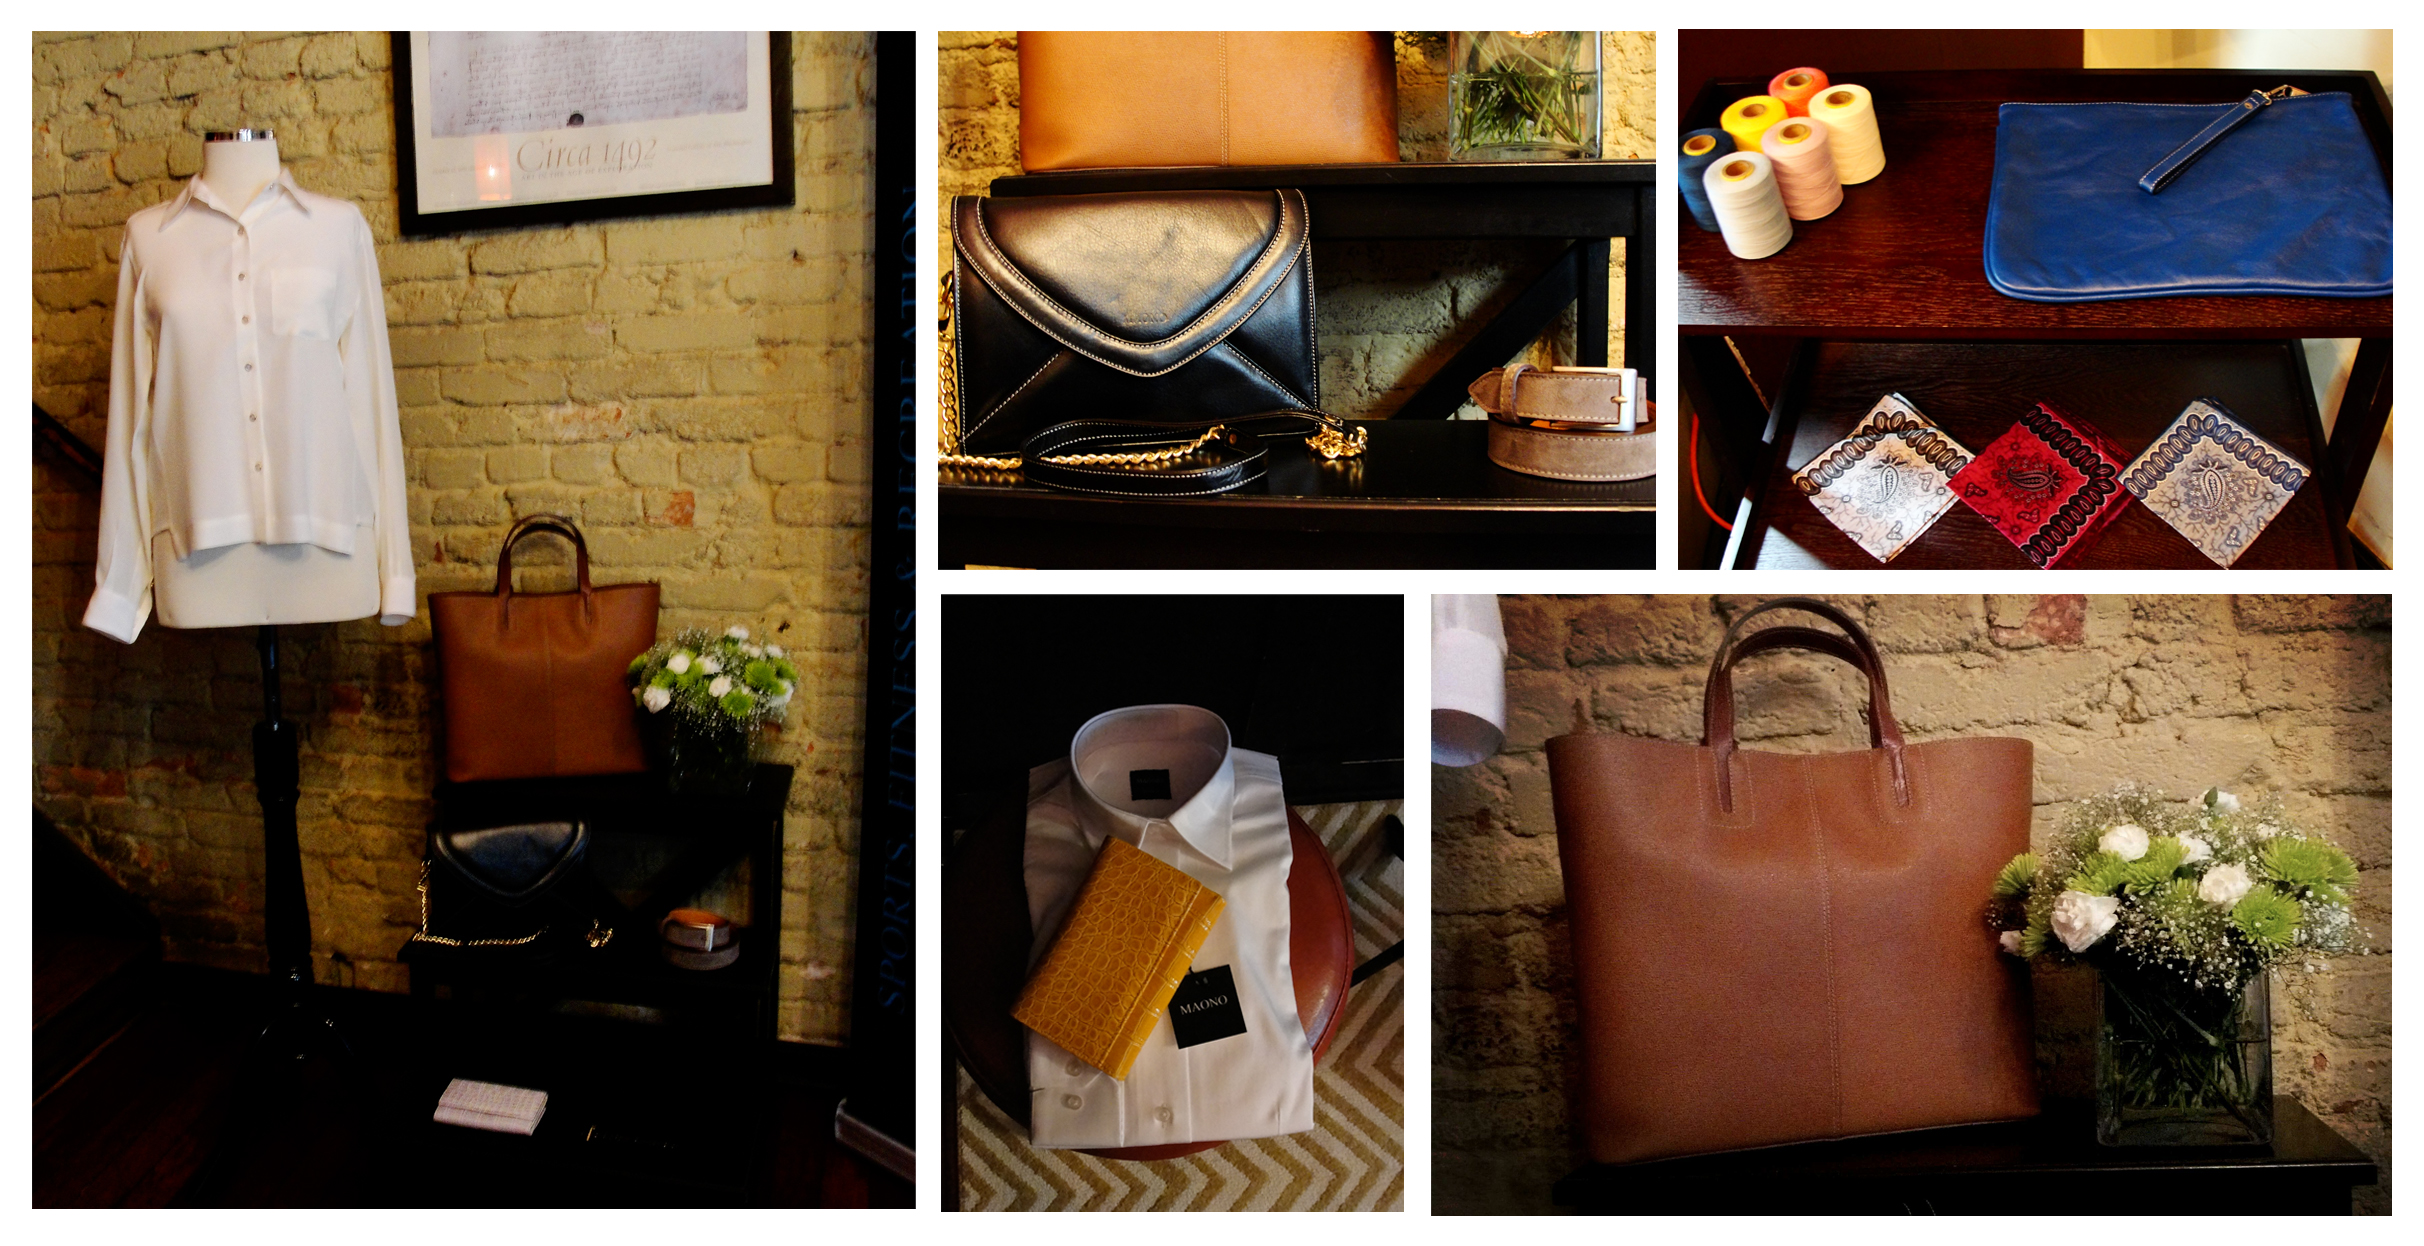 Beautiful leather bags, silk shirts and accessories. (Photos by Liz Parker/DC on Heels)